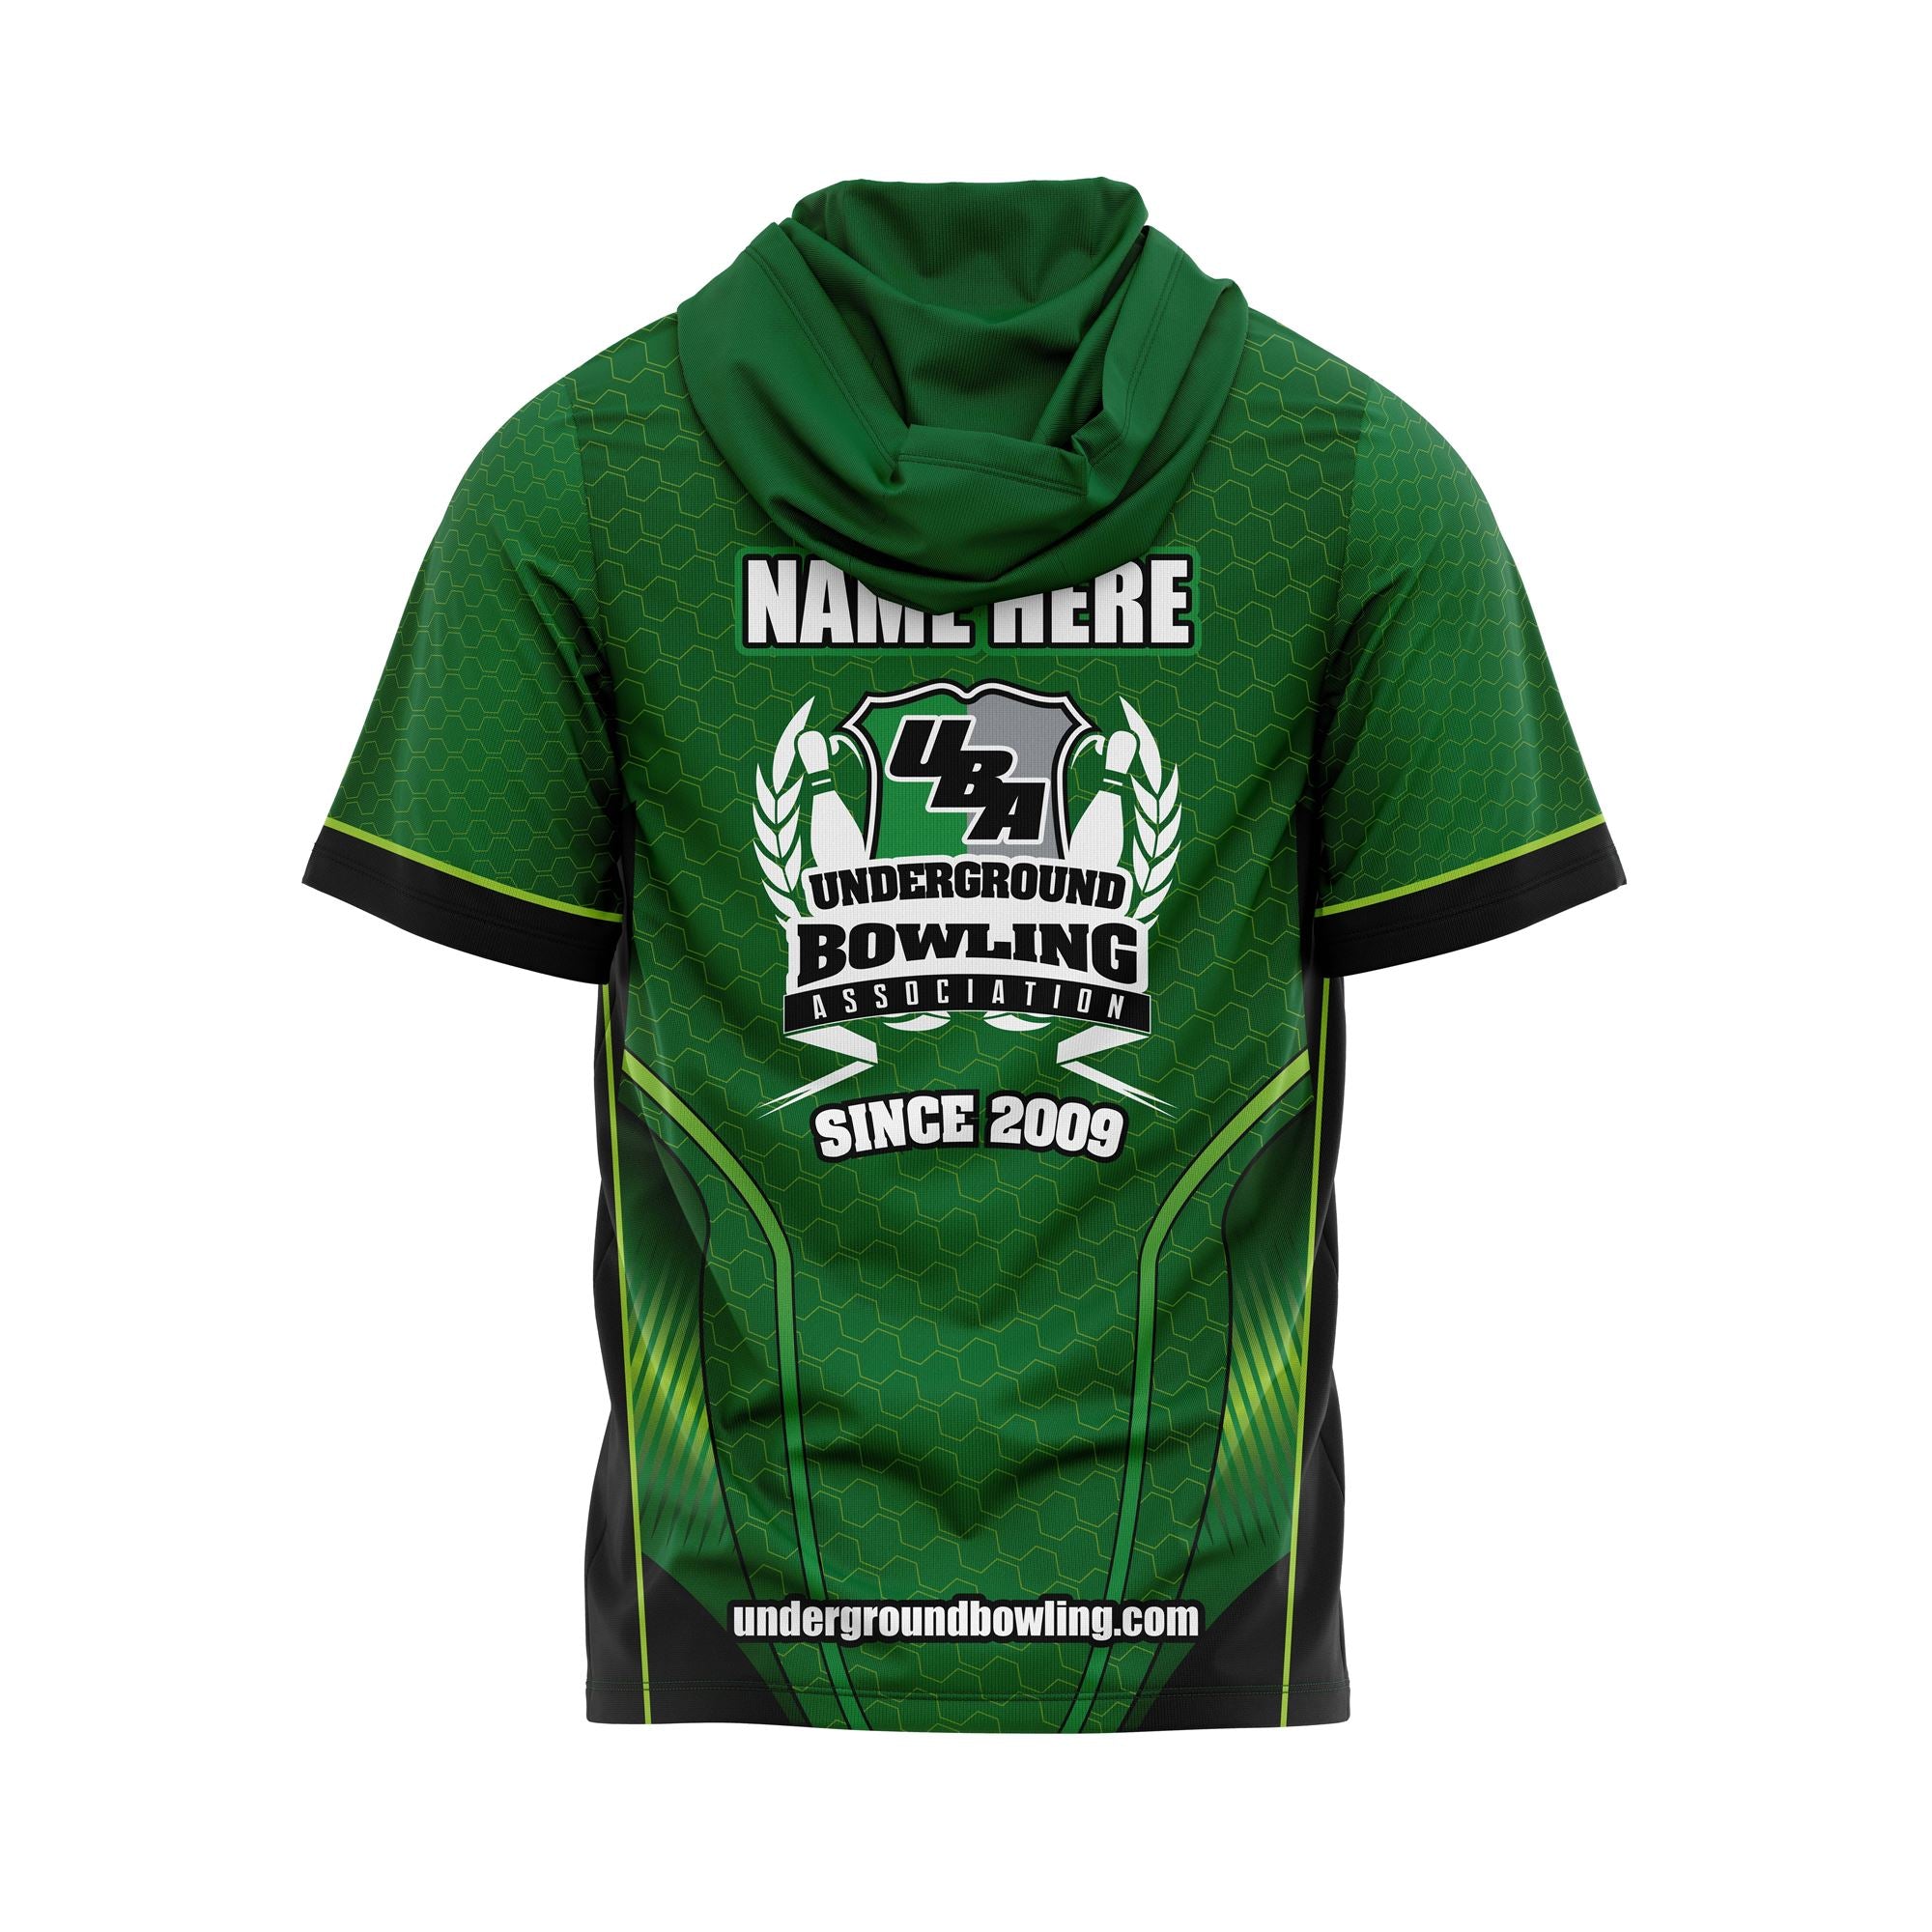 About The Money Green Jerseys